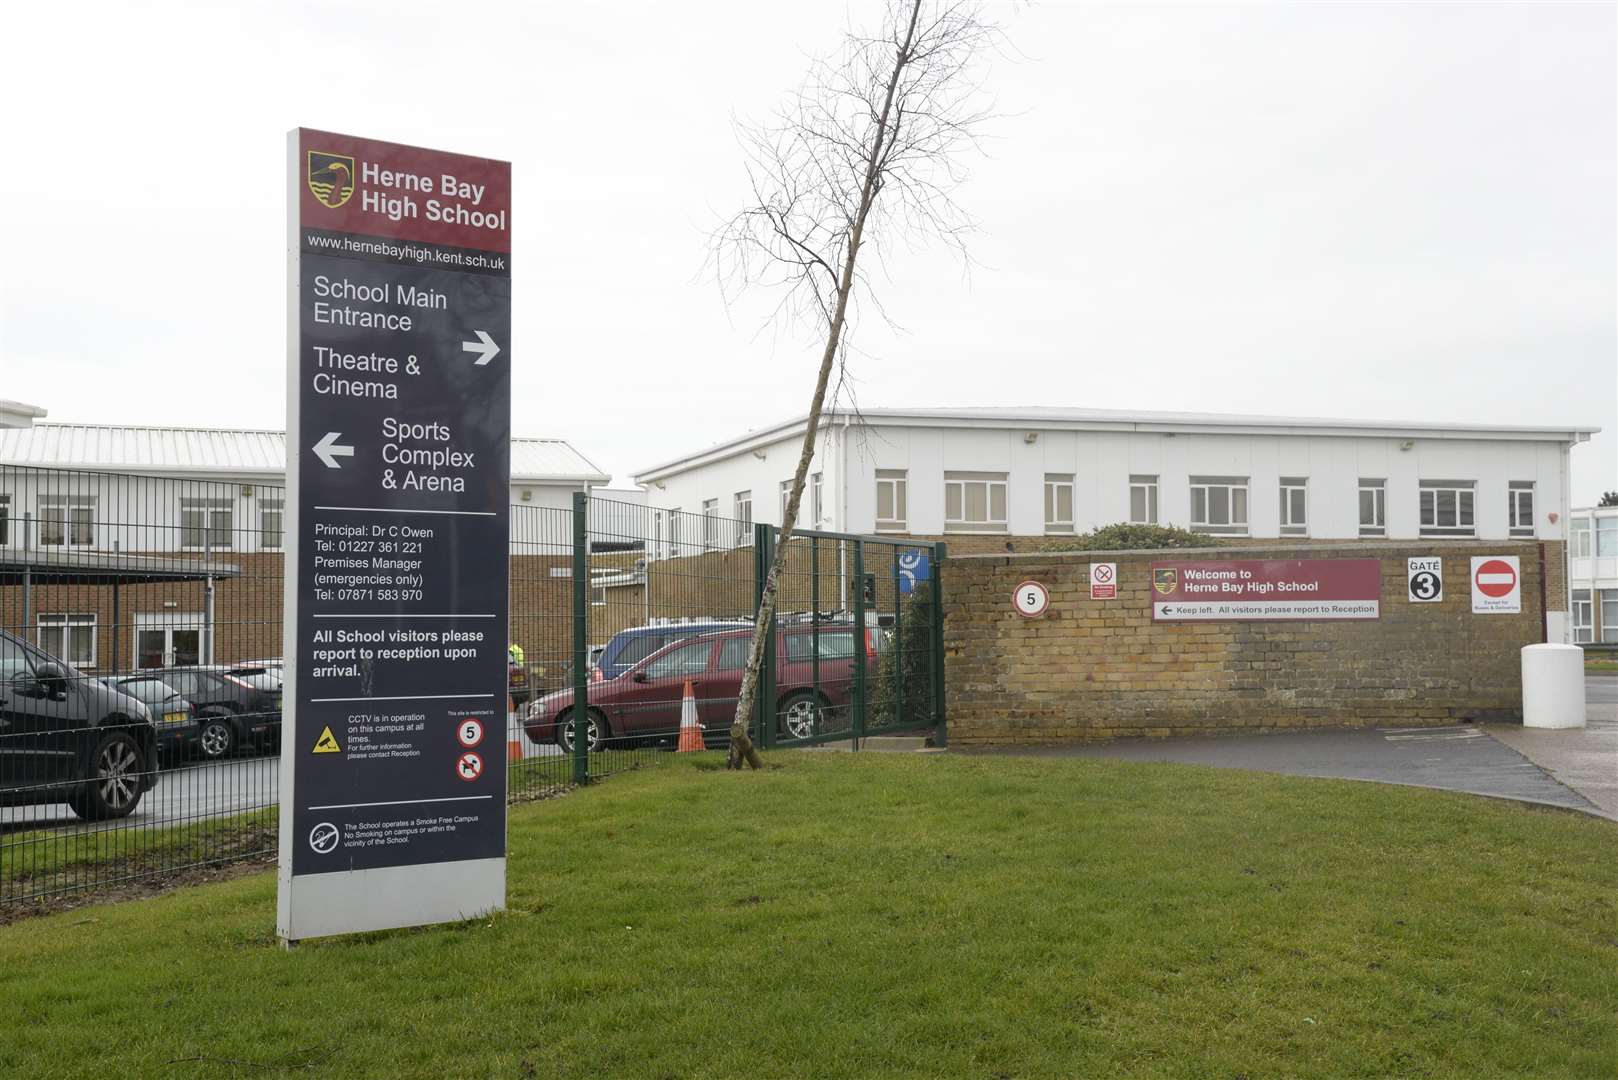 Pupils in Years 9, 10 and 13 at Herne Bay High School are self-isolating